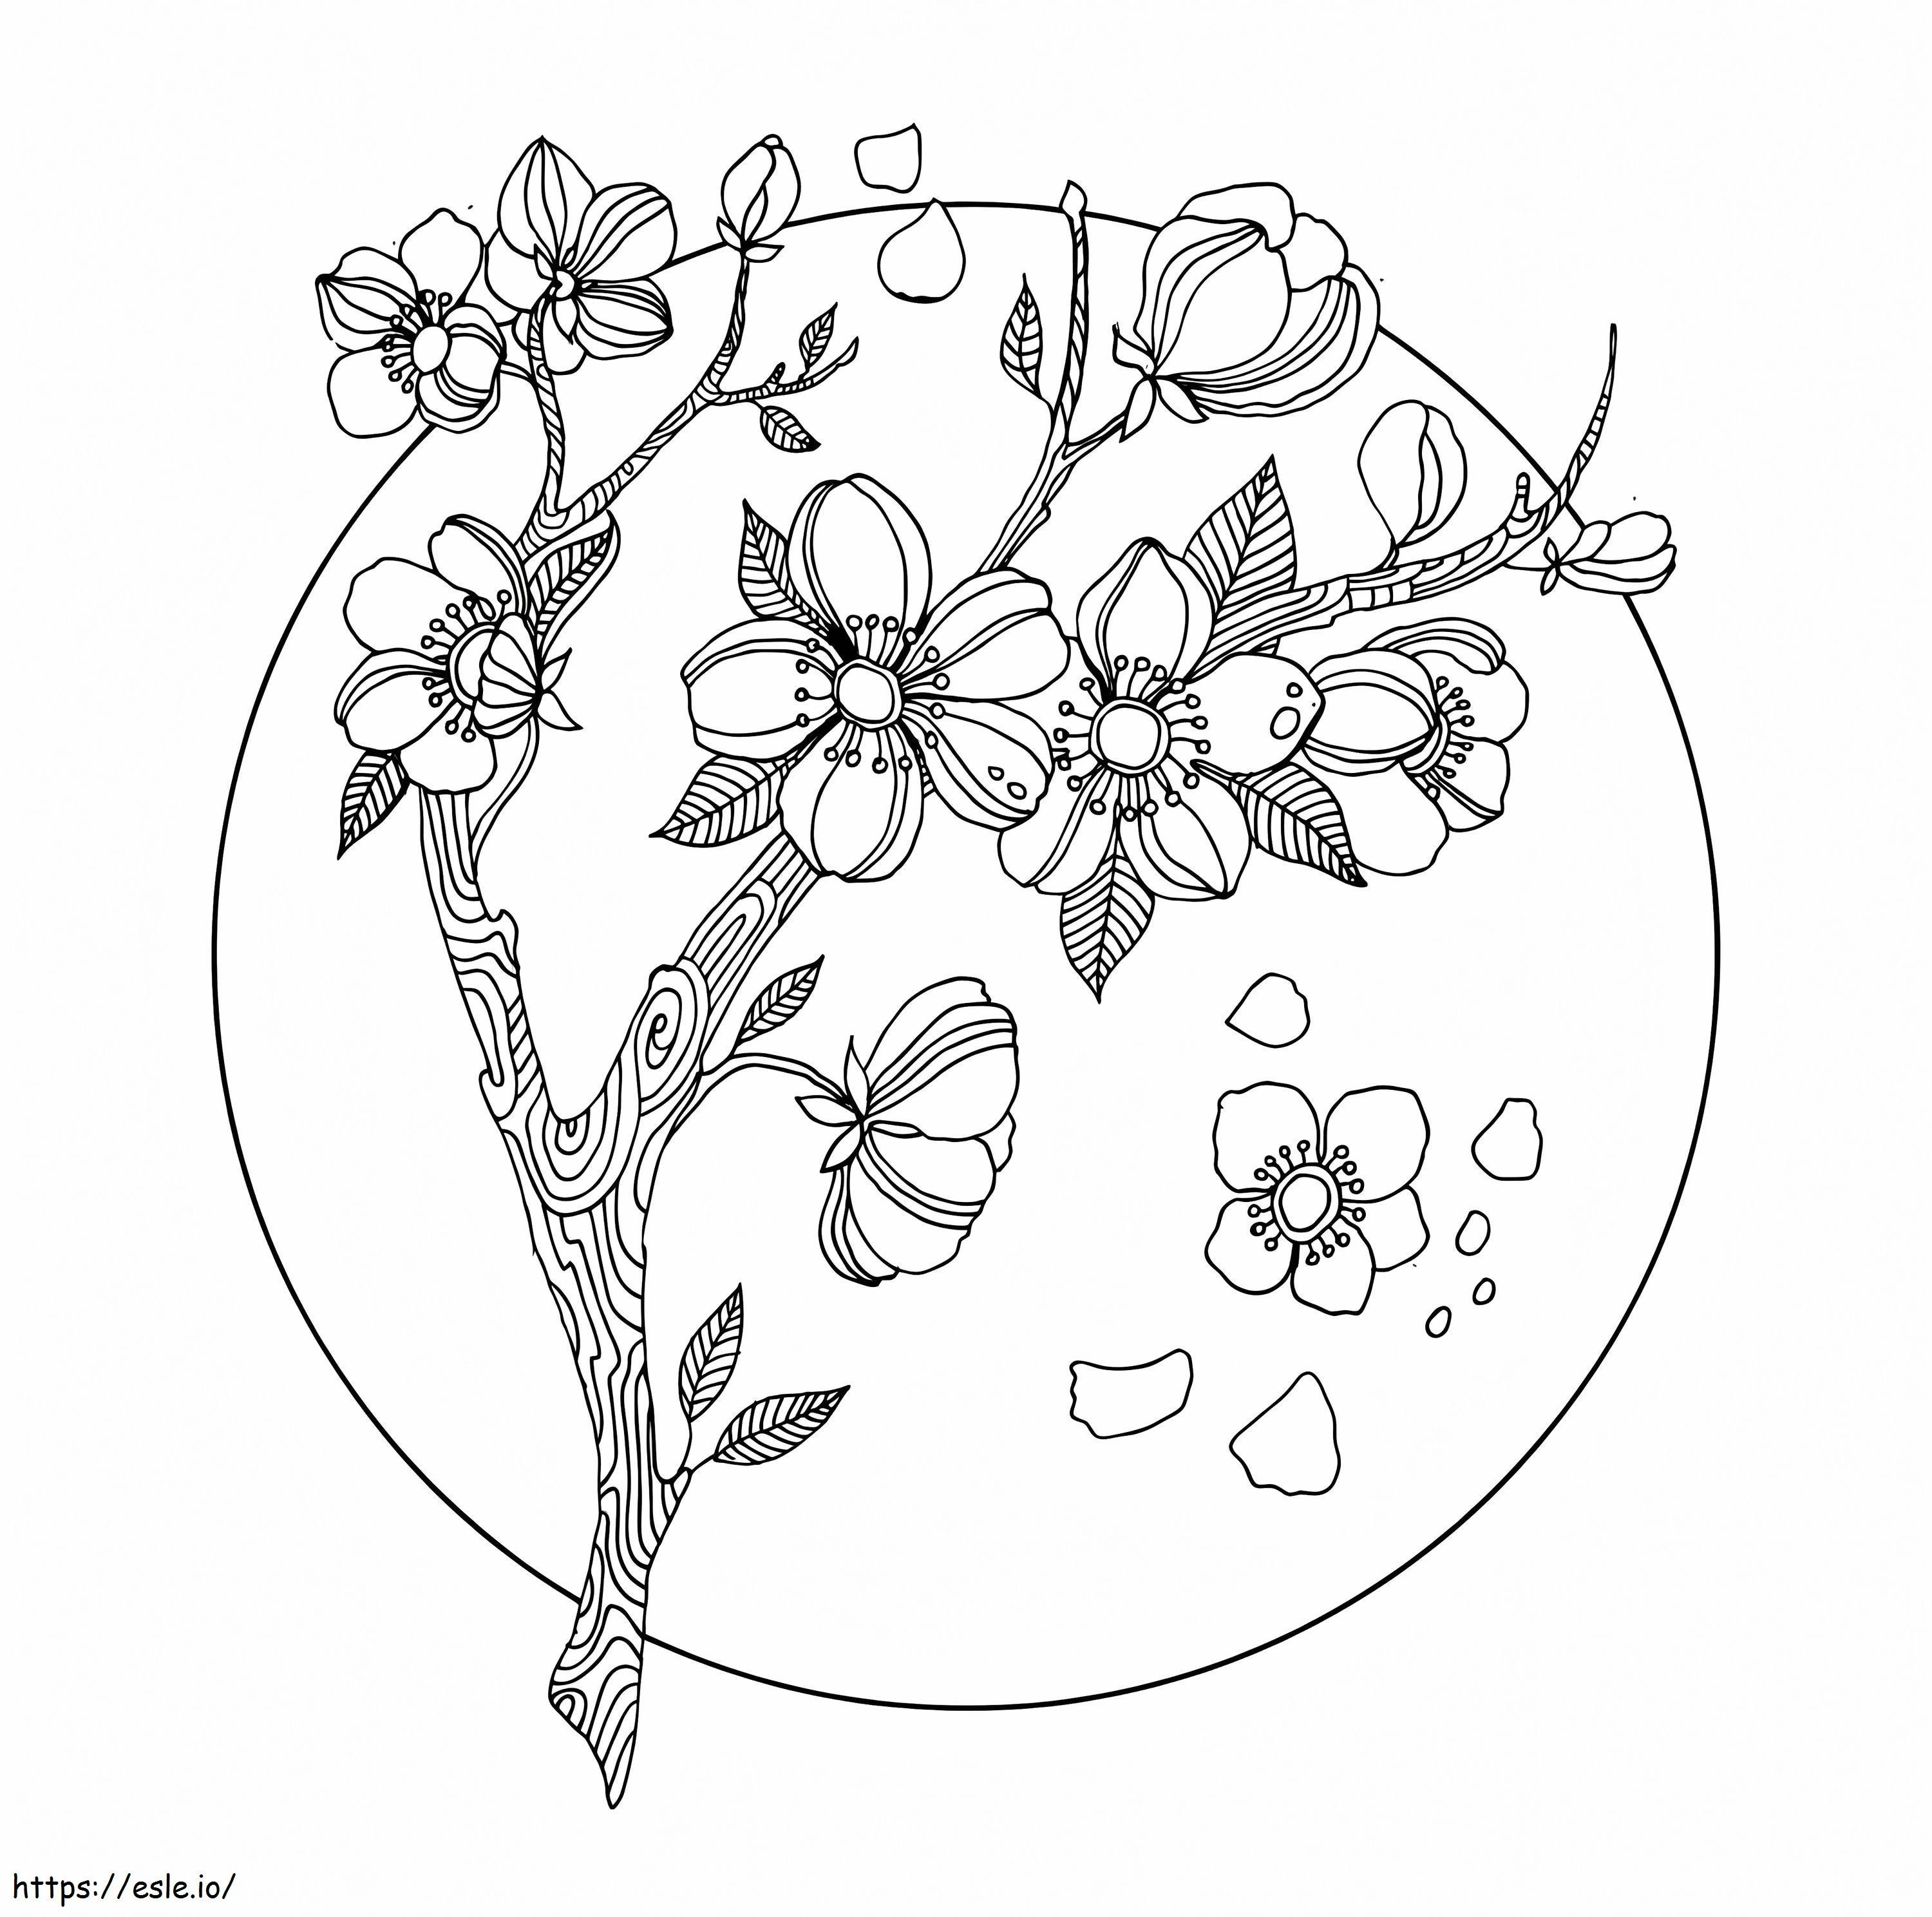 Stunning Cherry Blossom coloring page